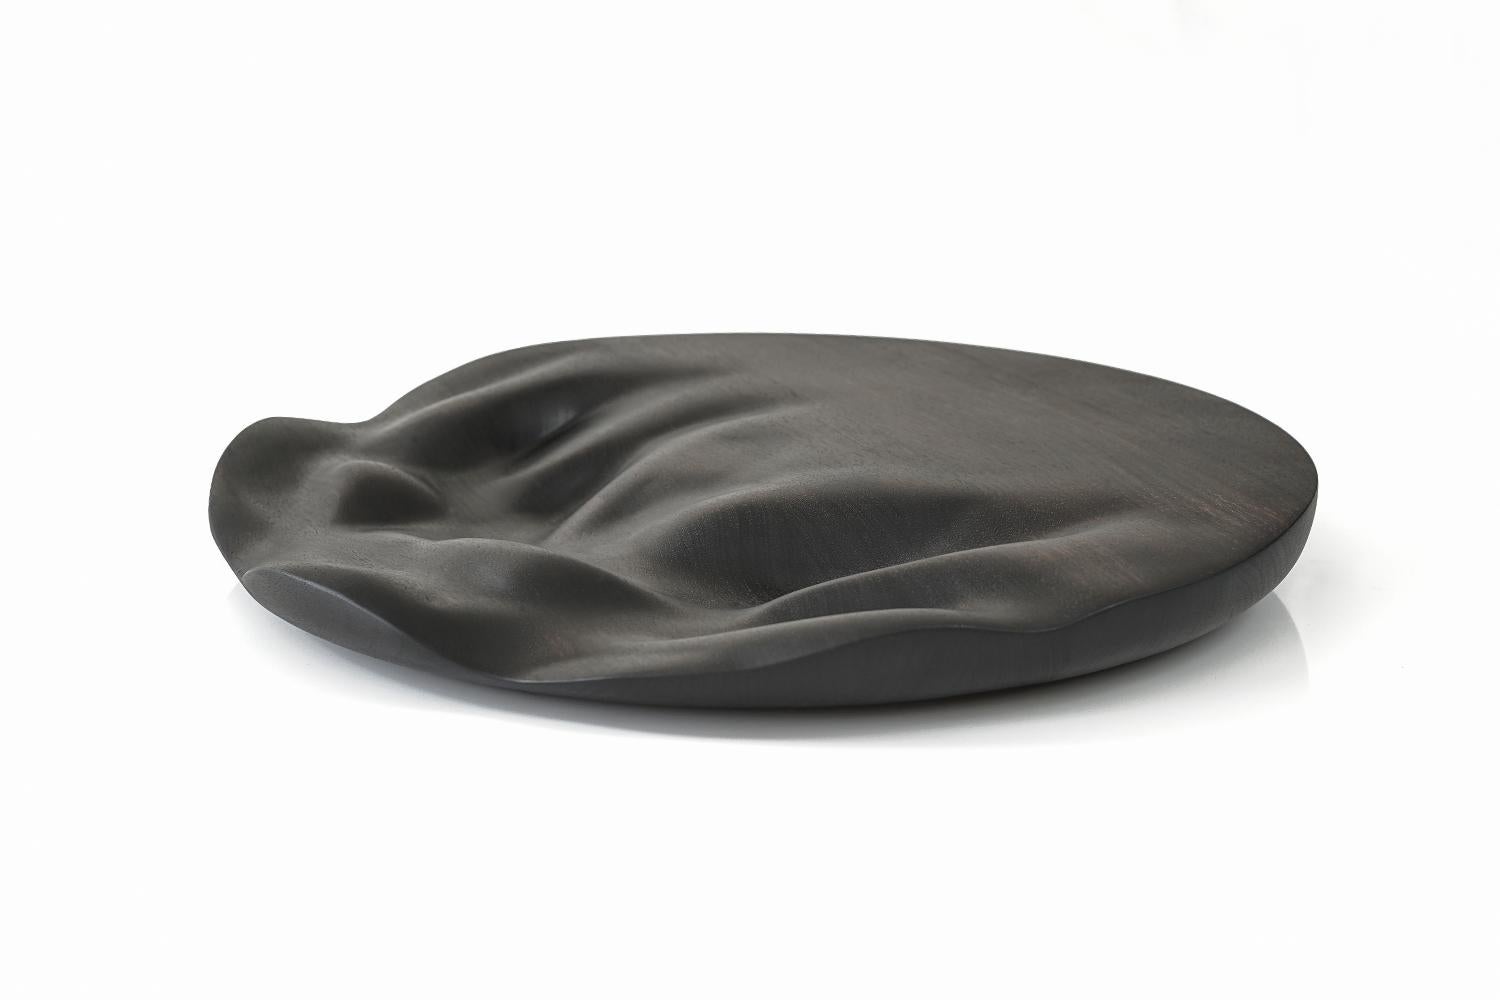 Large flow round contemporary ebonized serving board by Vincent Pocsik

Carved walnut cutting board with ebonized finish.

Natural food safe oil and wax finish. 

Vincent Pocsik finds the balance between old and new fabrication techniques